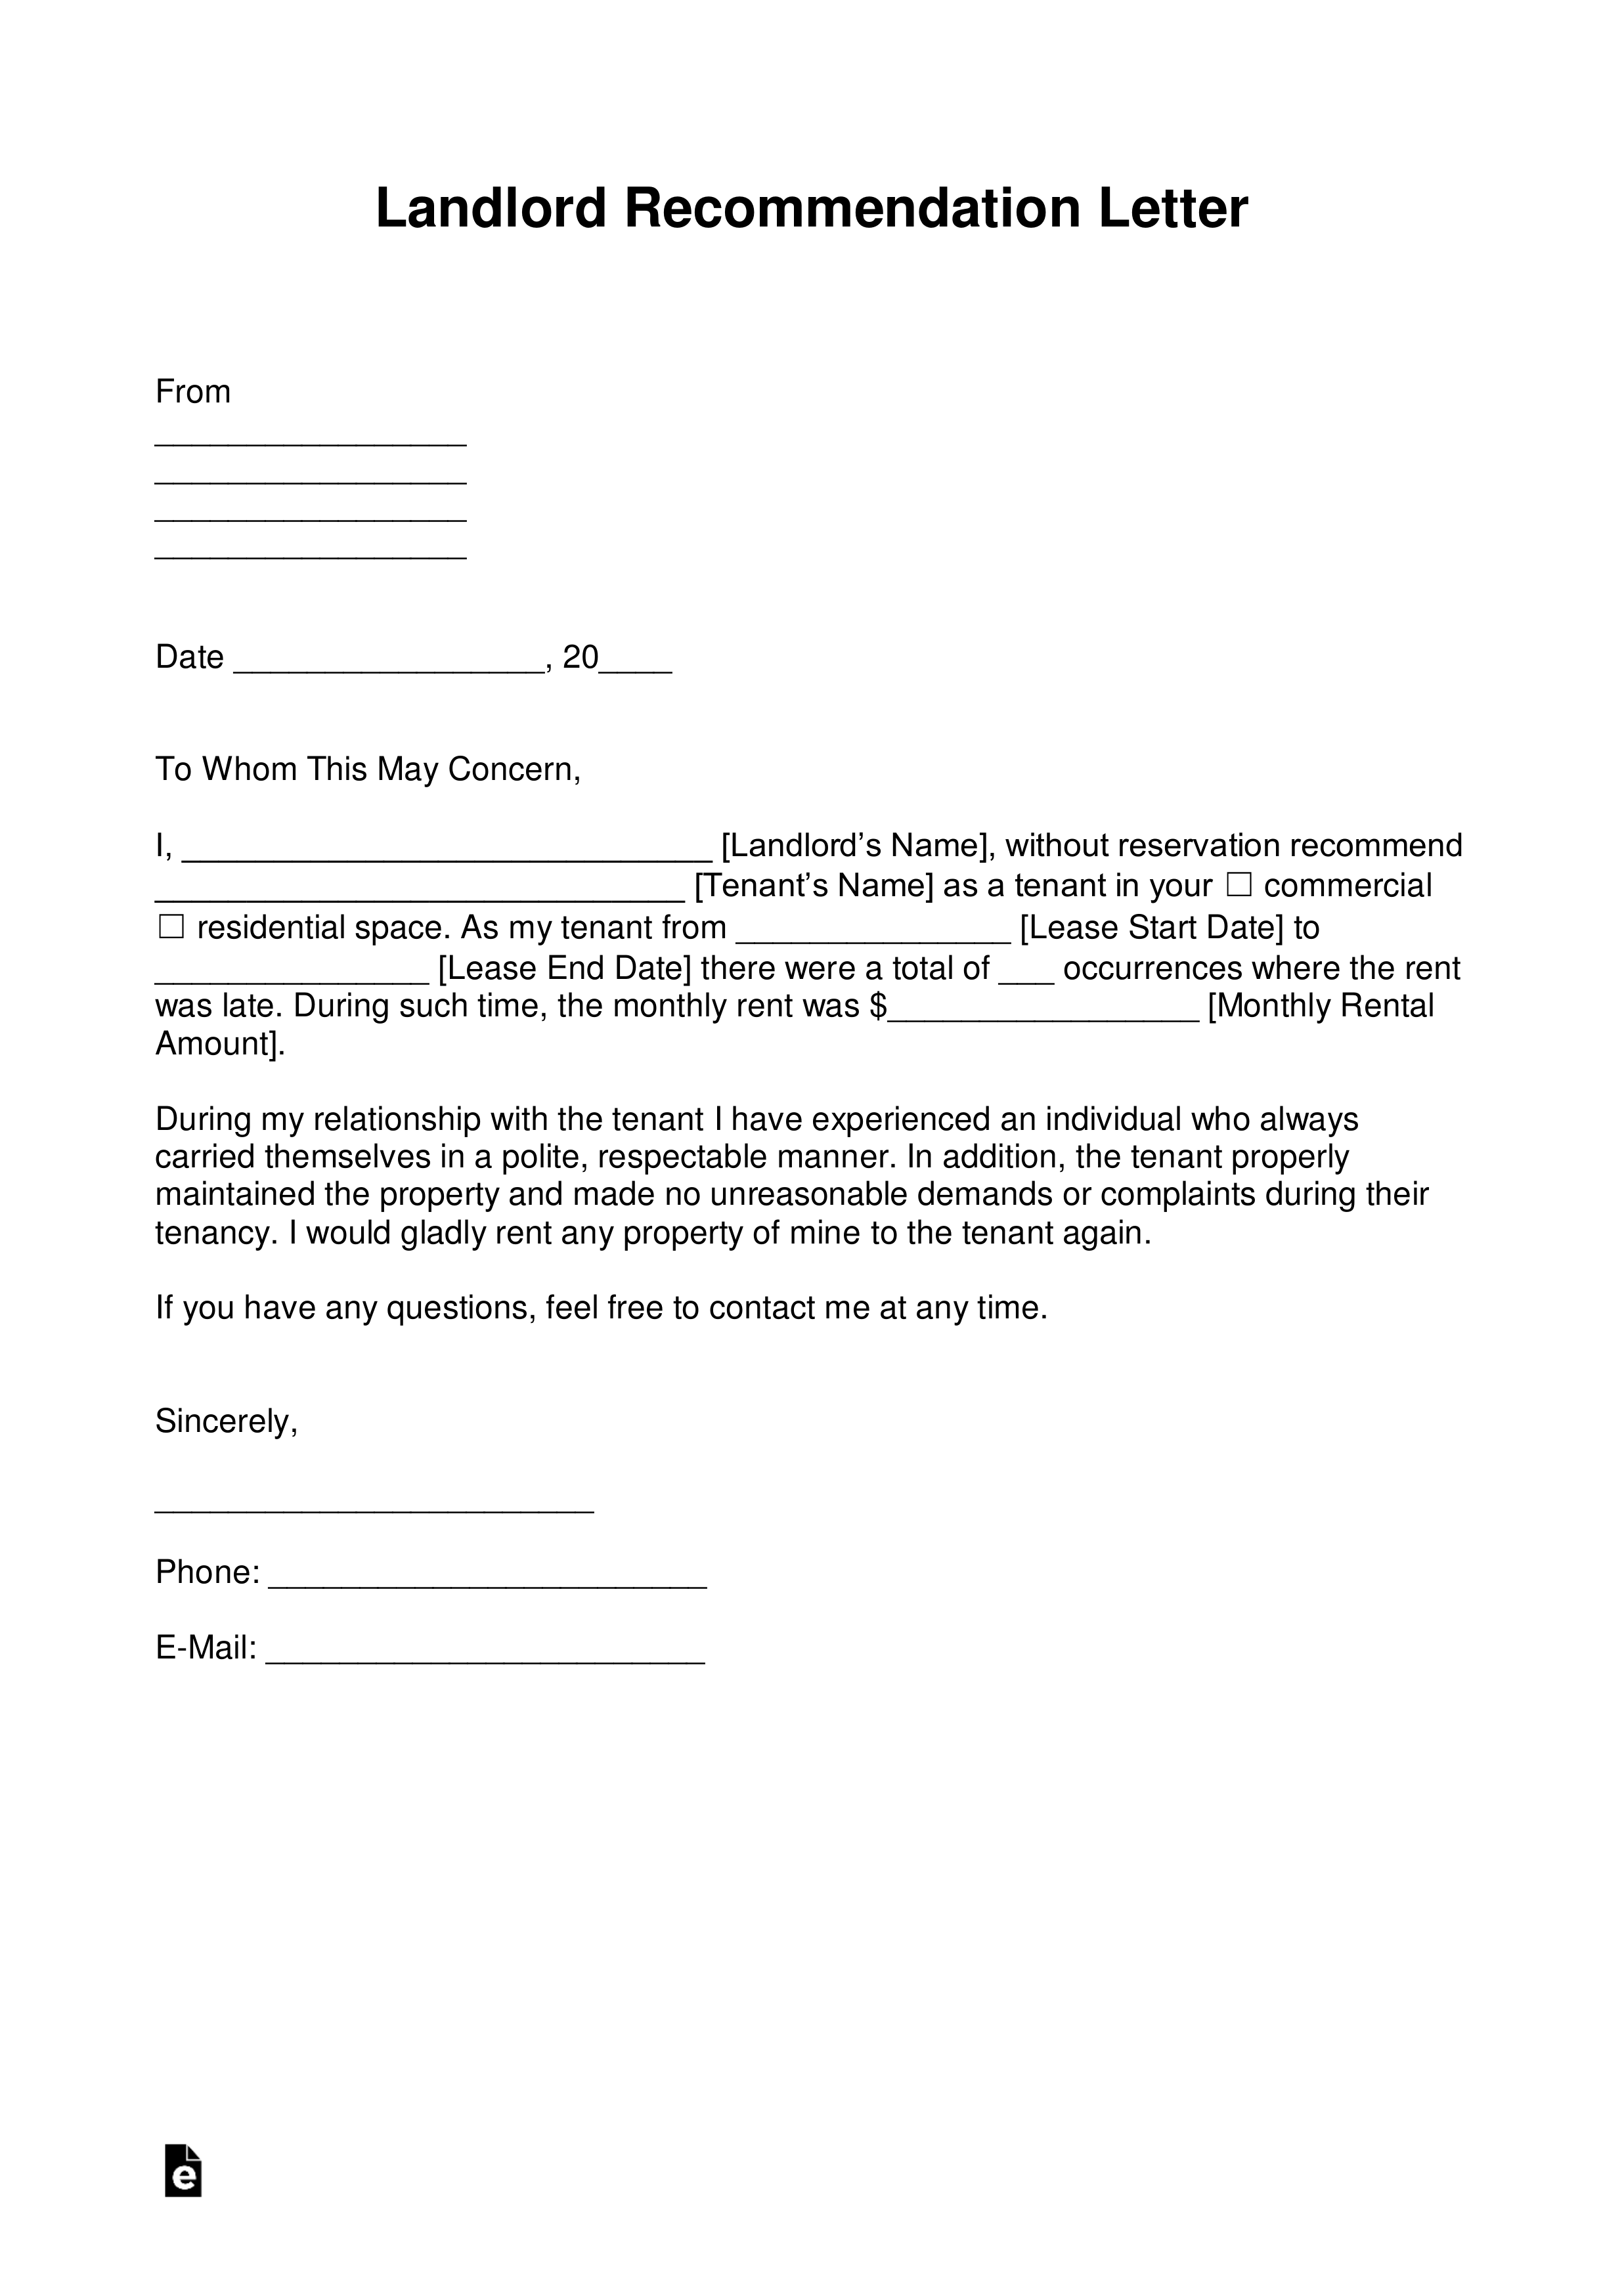 Landlord Recommendation Letter (for a Tenant) – with Samples